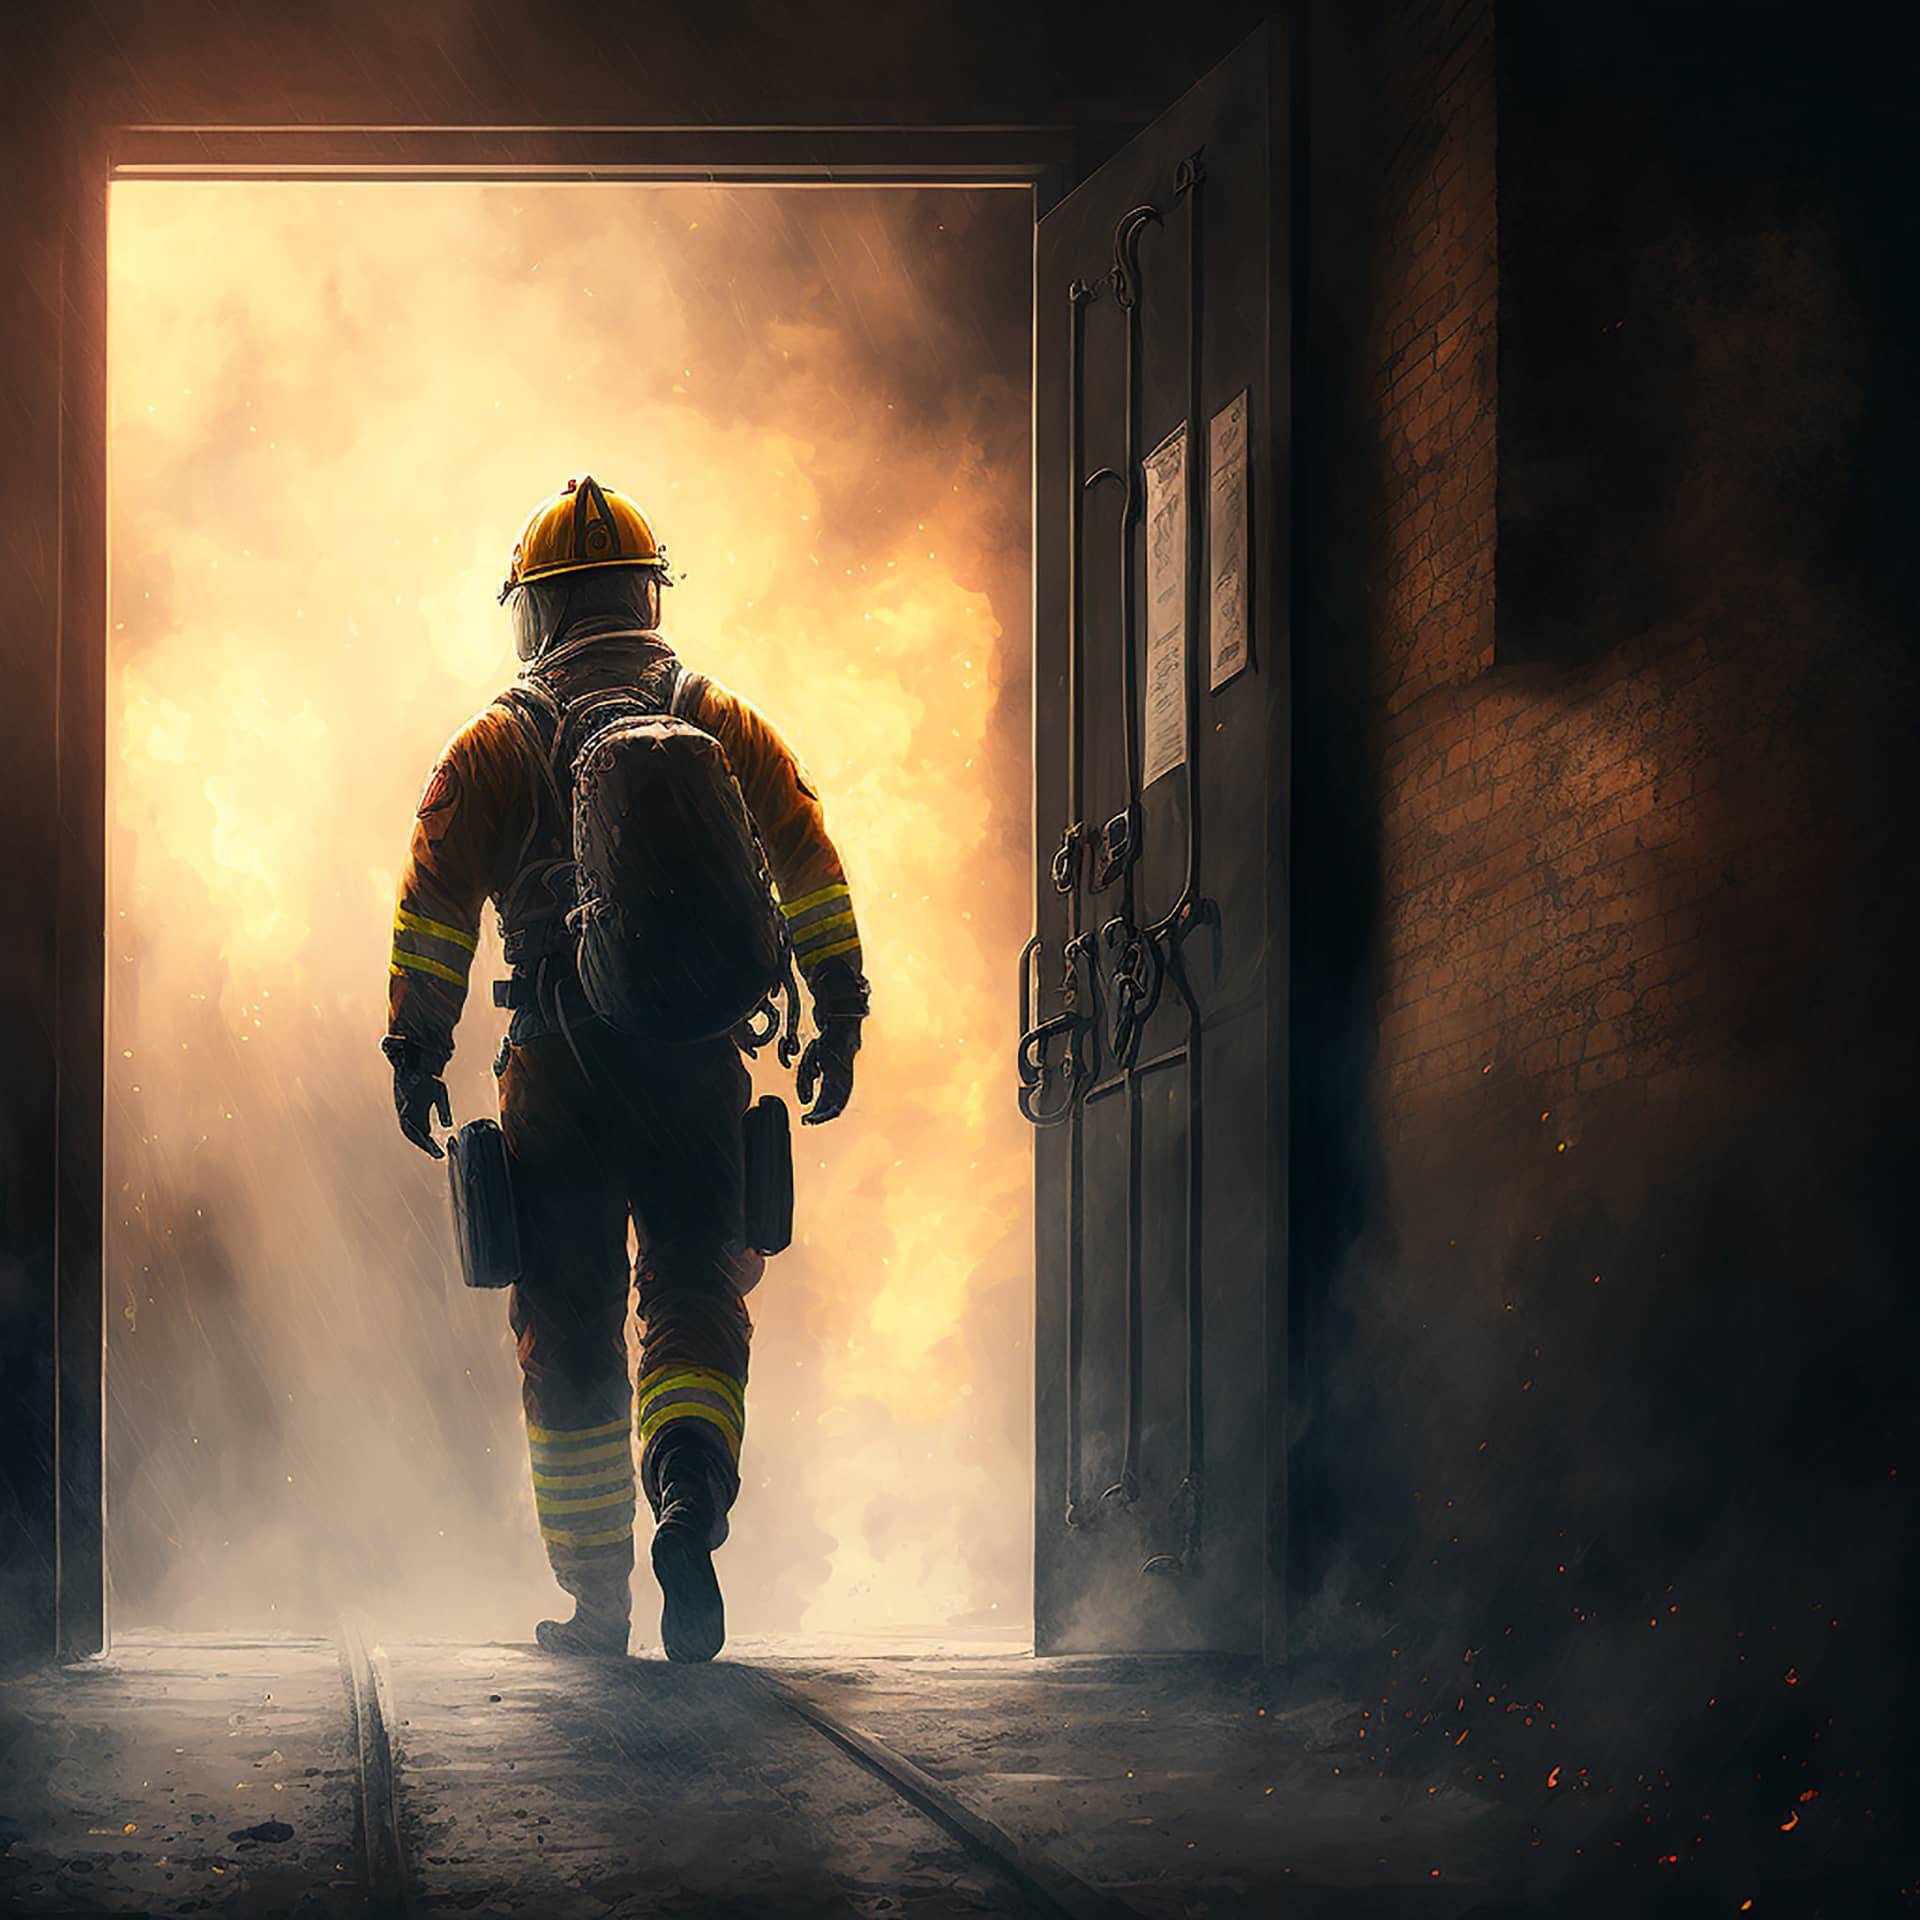 Pinterest profile picture firefighter entering building with fire